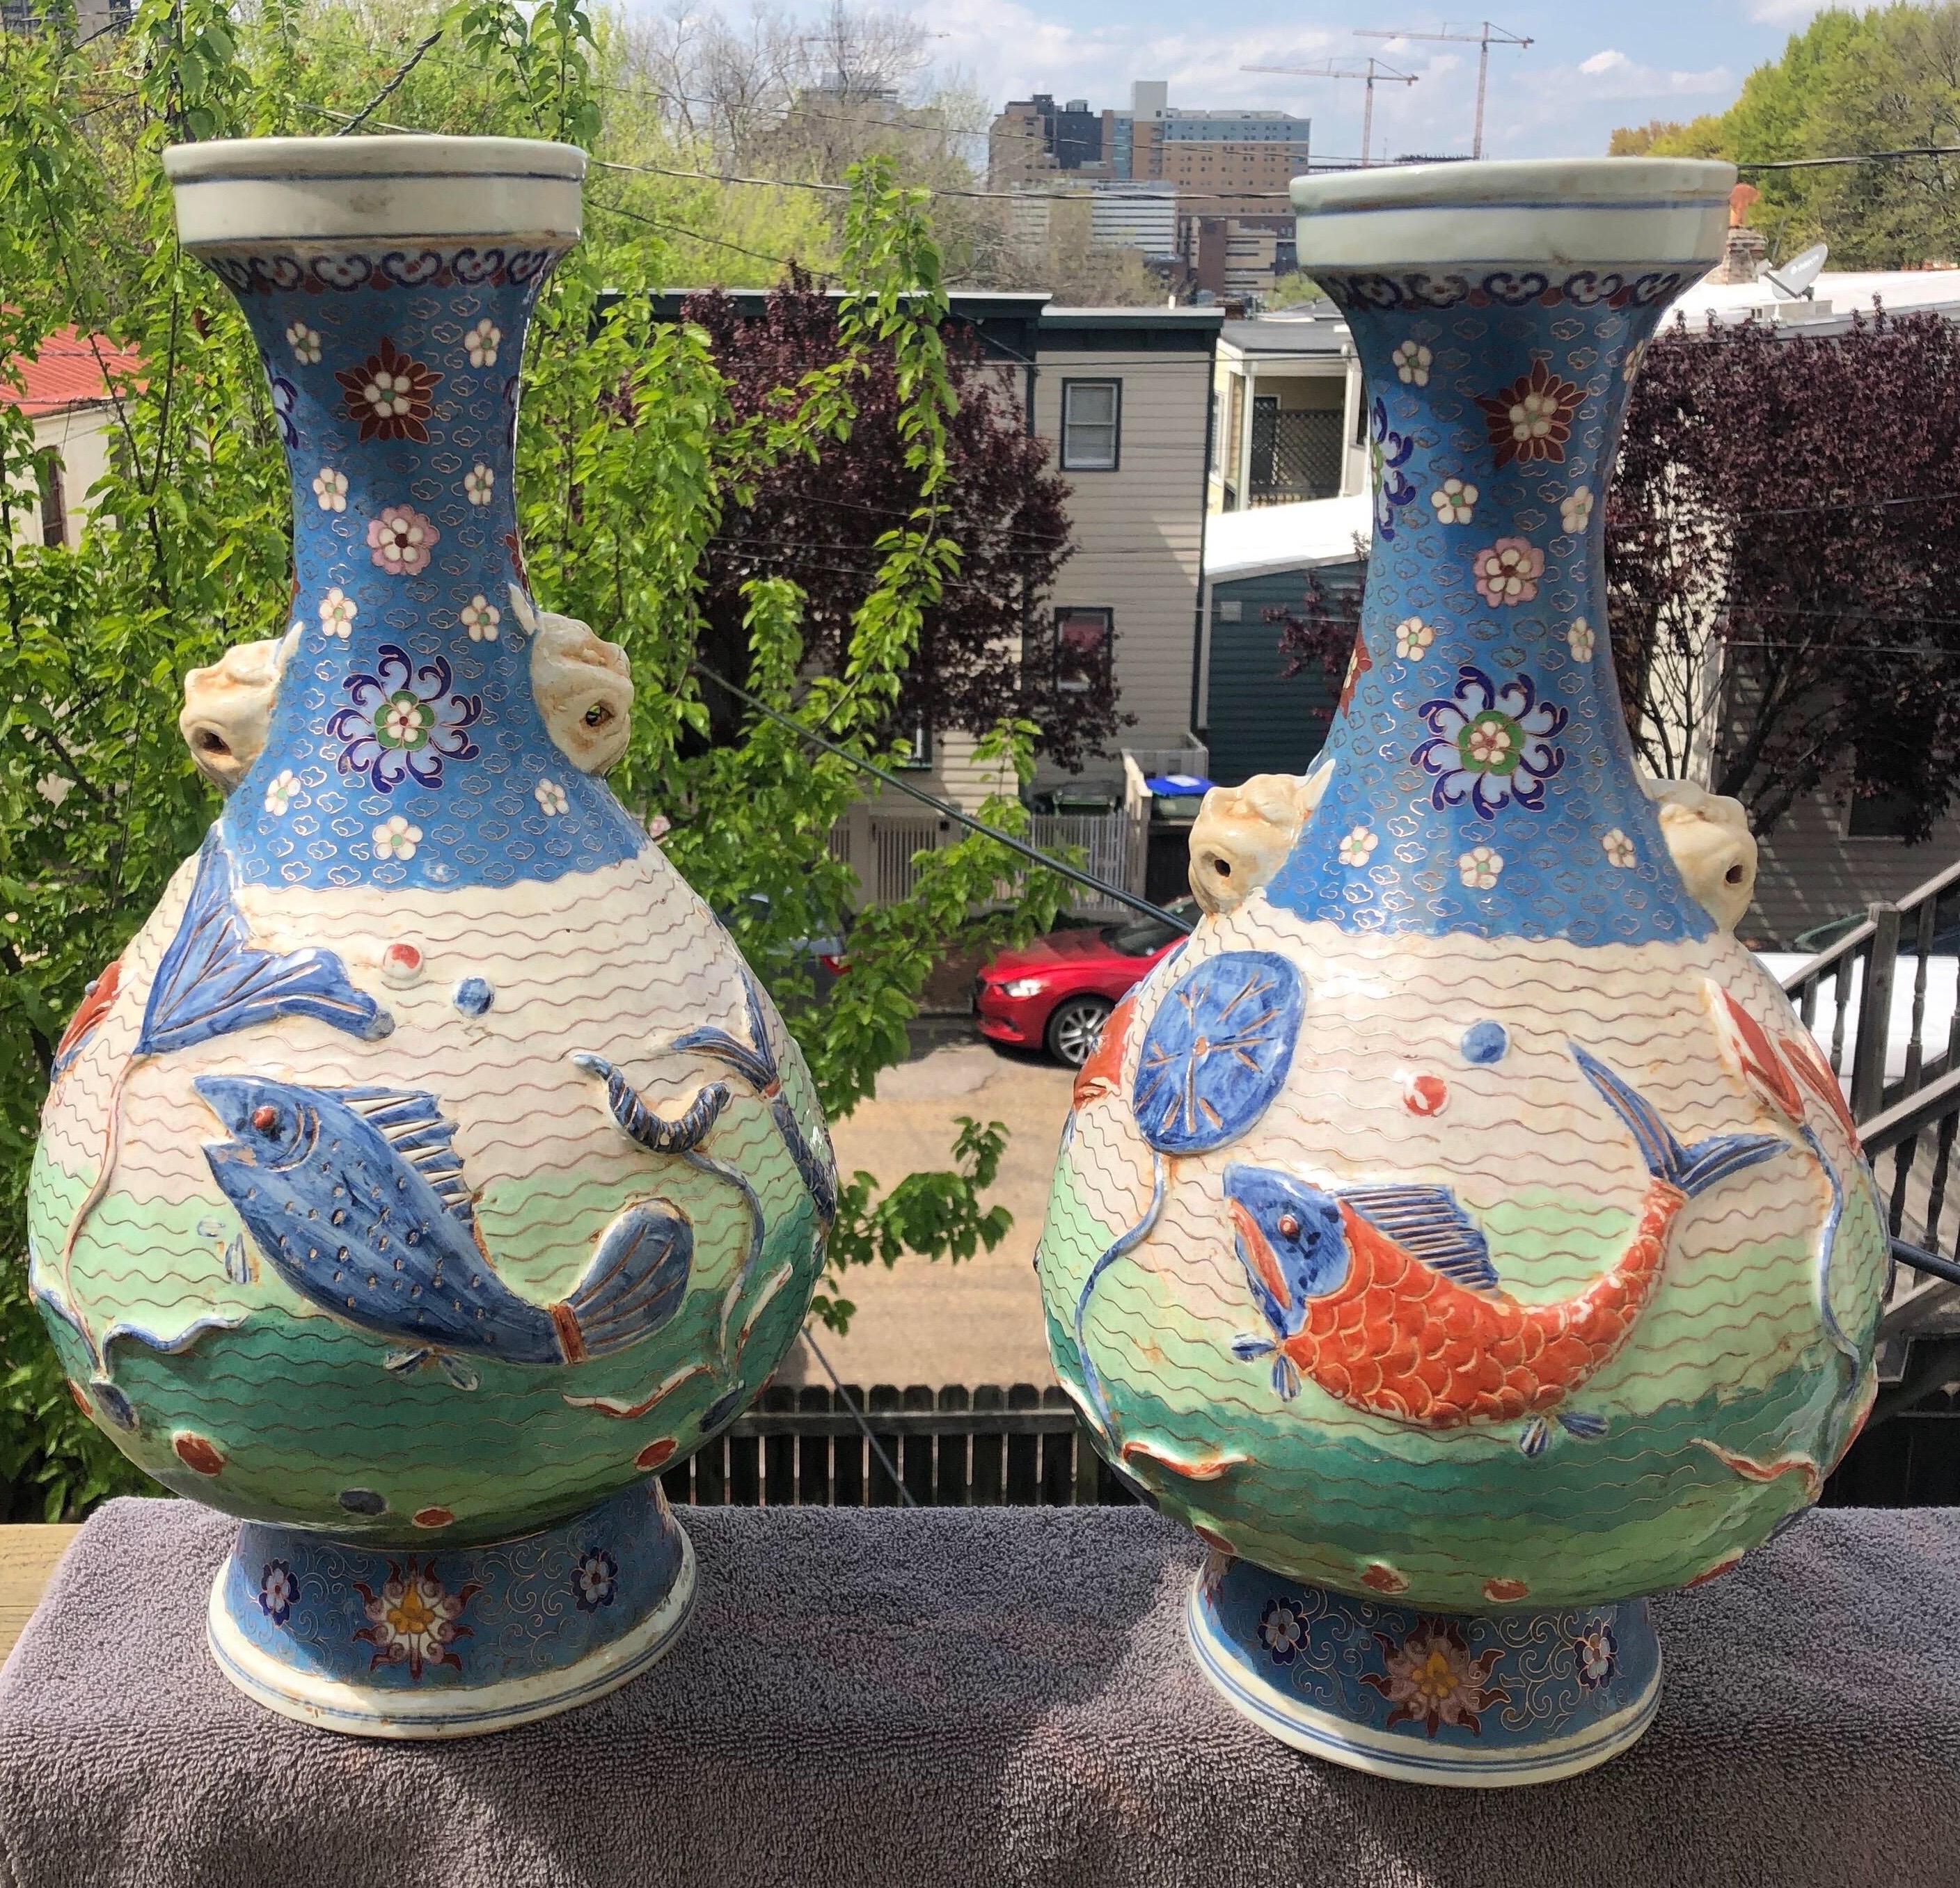 Pair of early 20th century Chinese cloisonne enameled porcelain bottle vases with mask handles, relief molded with fish in a lotus pond on a wire wave ground beneath clouds and flower heads. Vibrant greens, blue and coral colors.
 